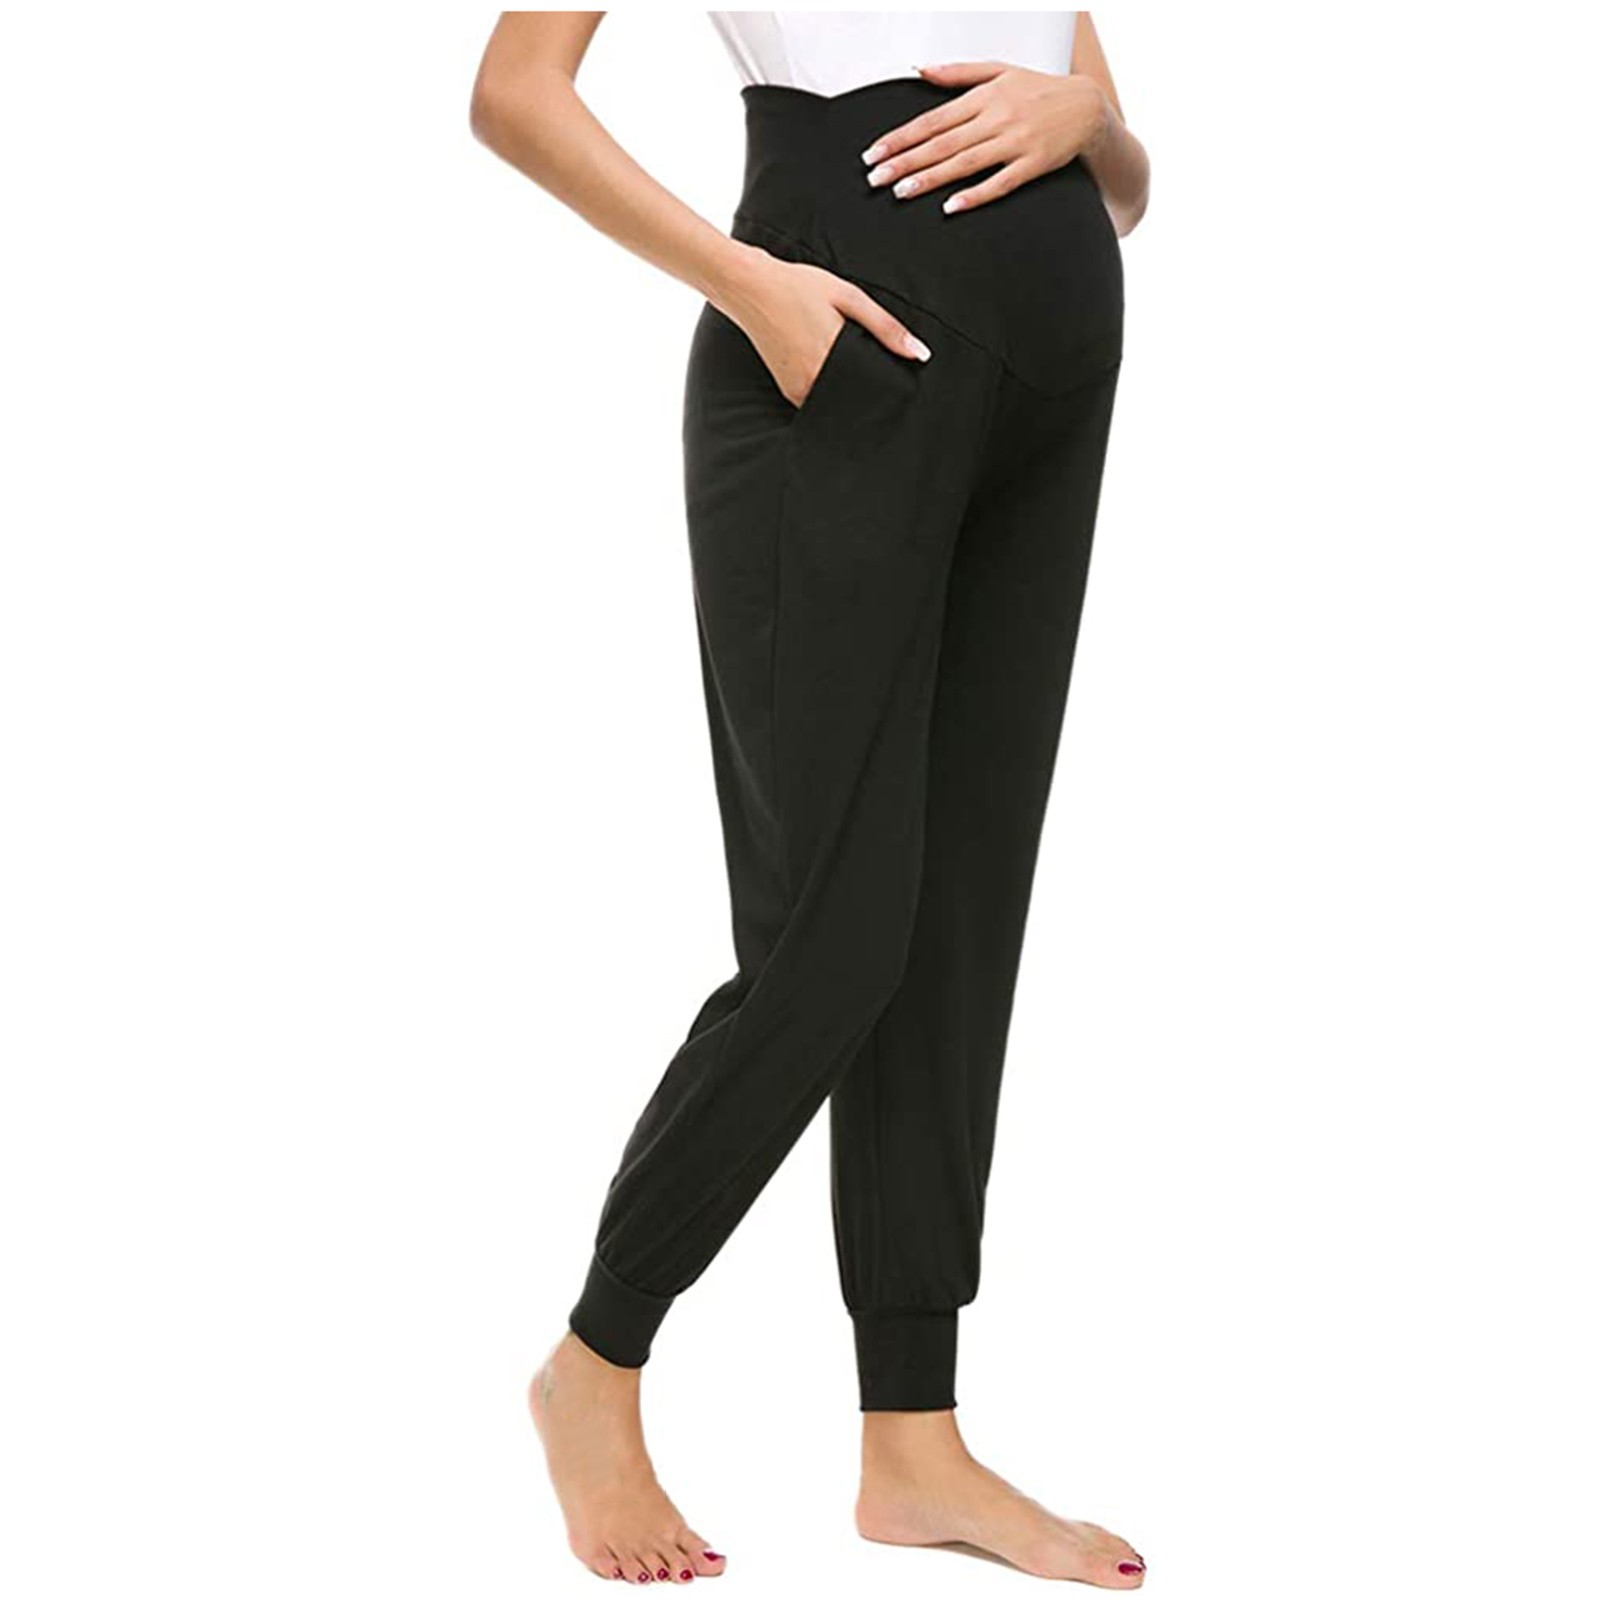 Dezsed Maternity Pants Clearance Women's Solid Color Casual Stretchy ...